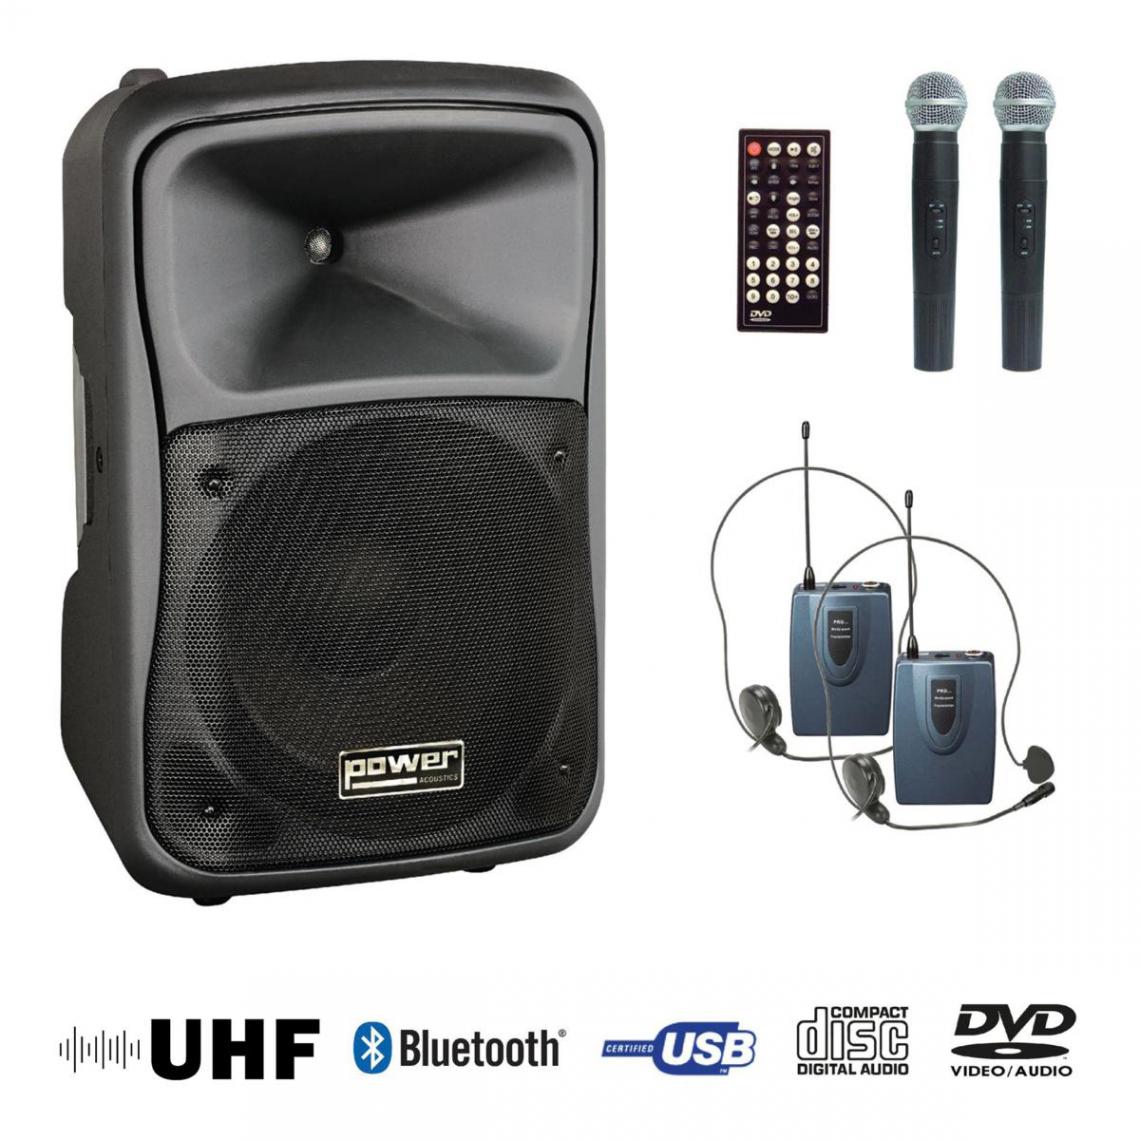 Power Acoustics - BE 9515 UHF PT ABS - Sono portable CD MP3+USB+DIVX+2 micros mains UHF+body pack - Sonorisation portable